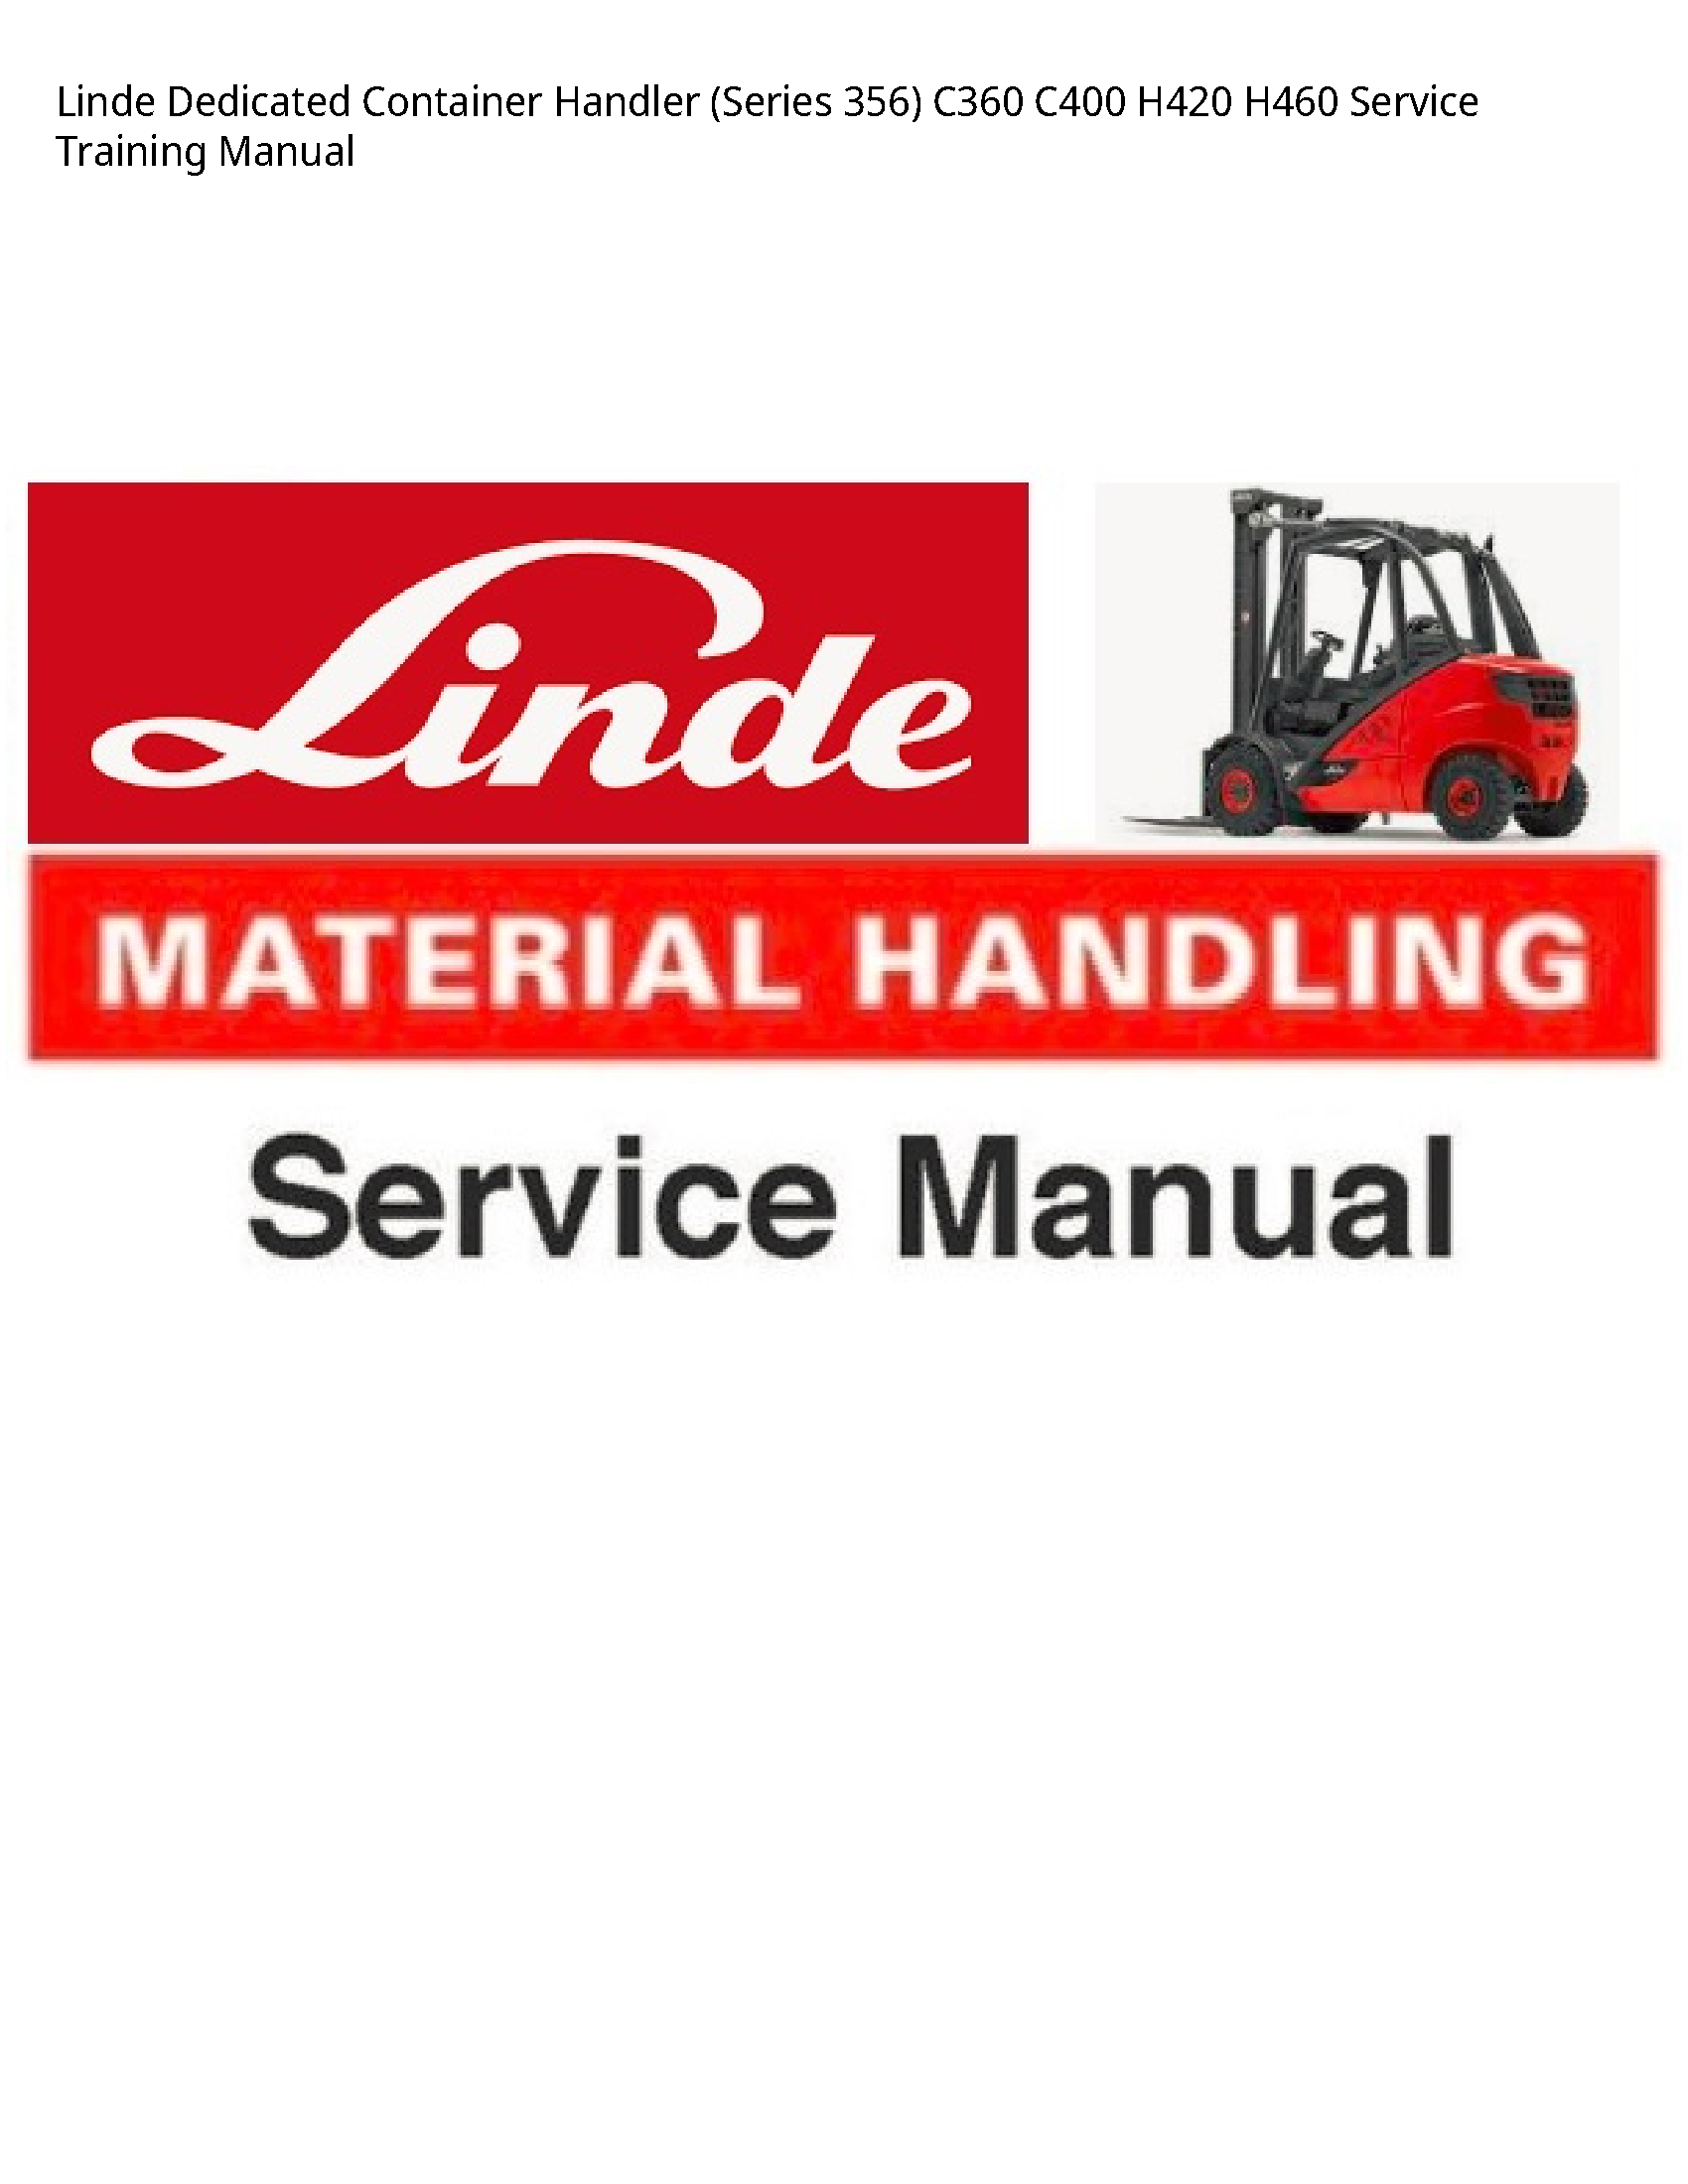 Linde 356) Dedicated Container Handler (Series Service Training manual